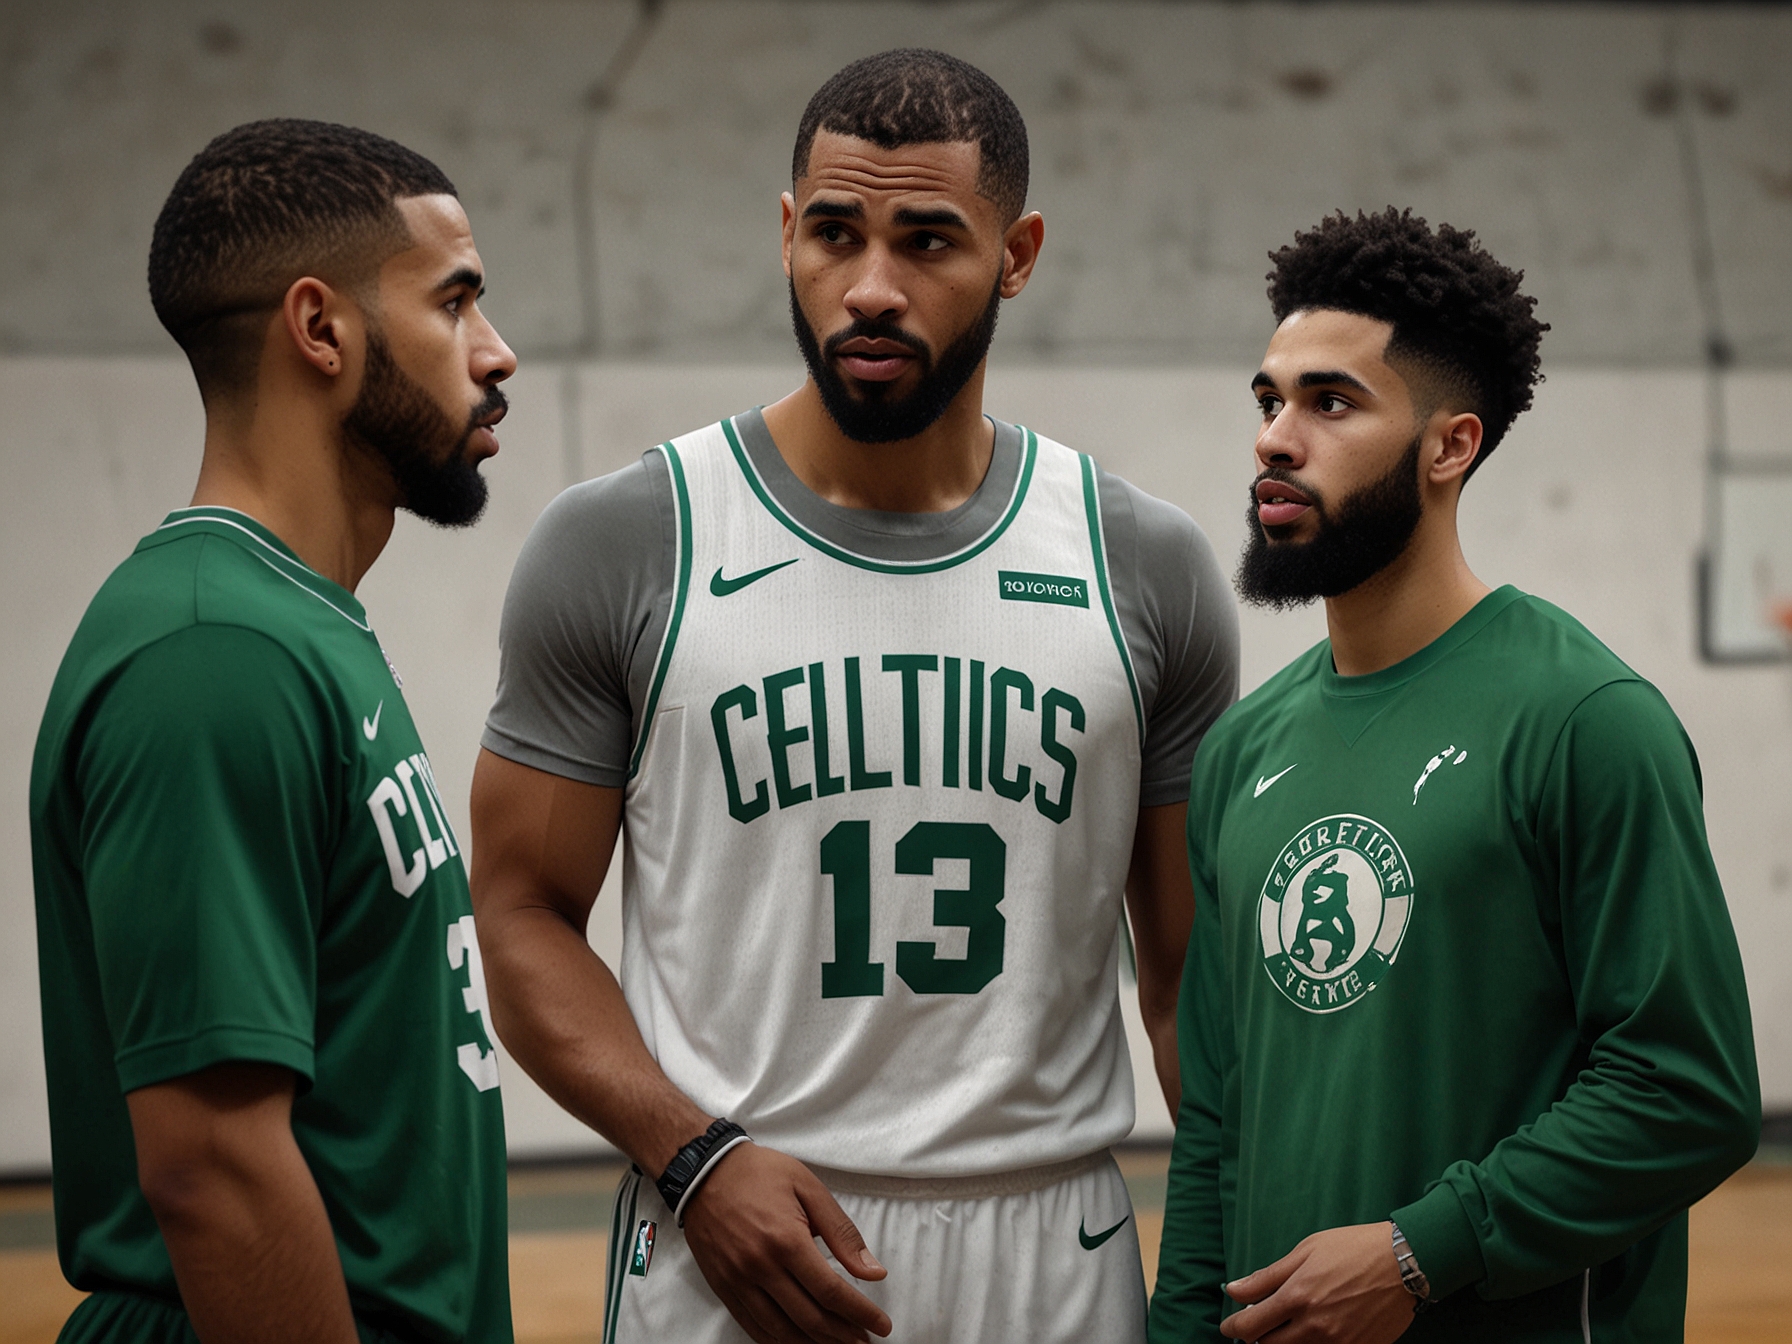 Celtics head coach Ime Udoka discussing strategy with team leaders Jayson Tatum and Jaylen Brown during practice, focusing on their preparation for the upcoming season without Porzingis.